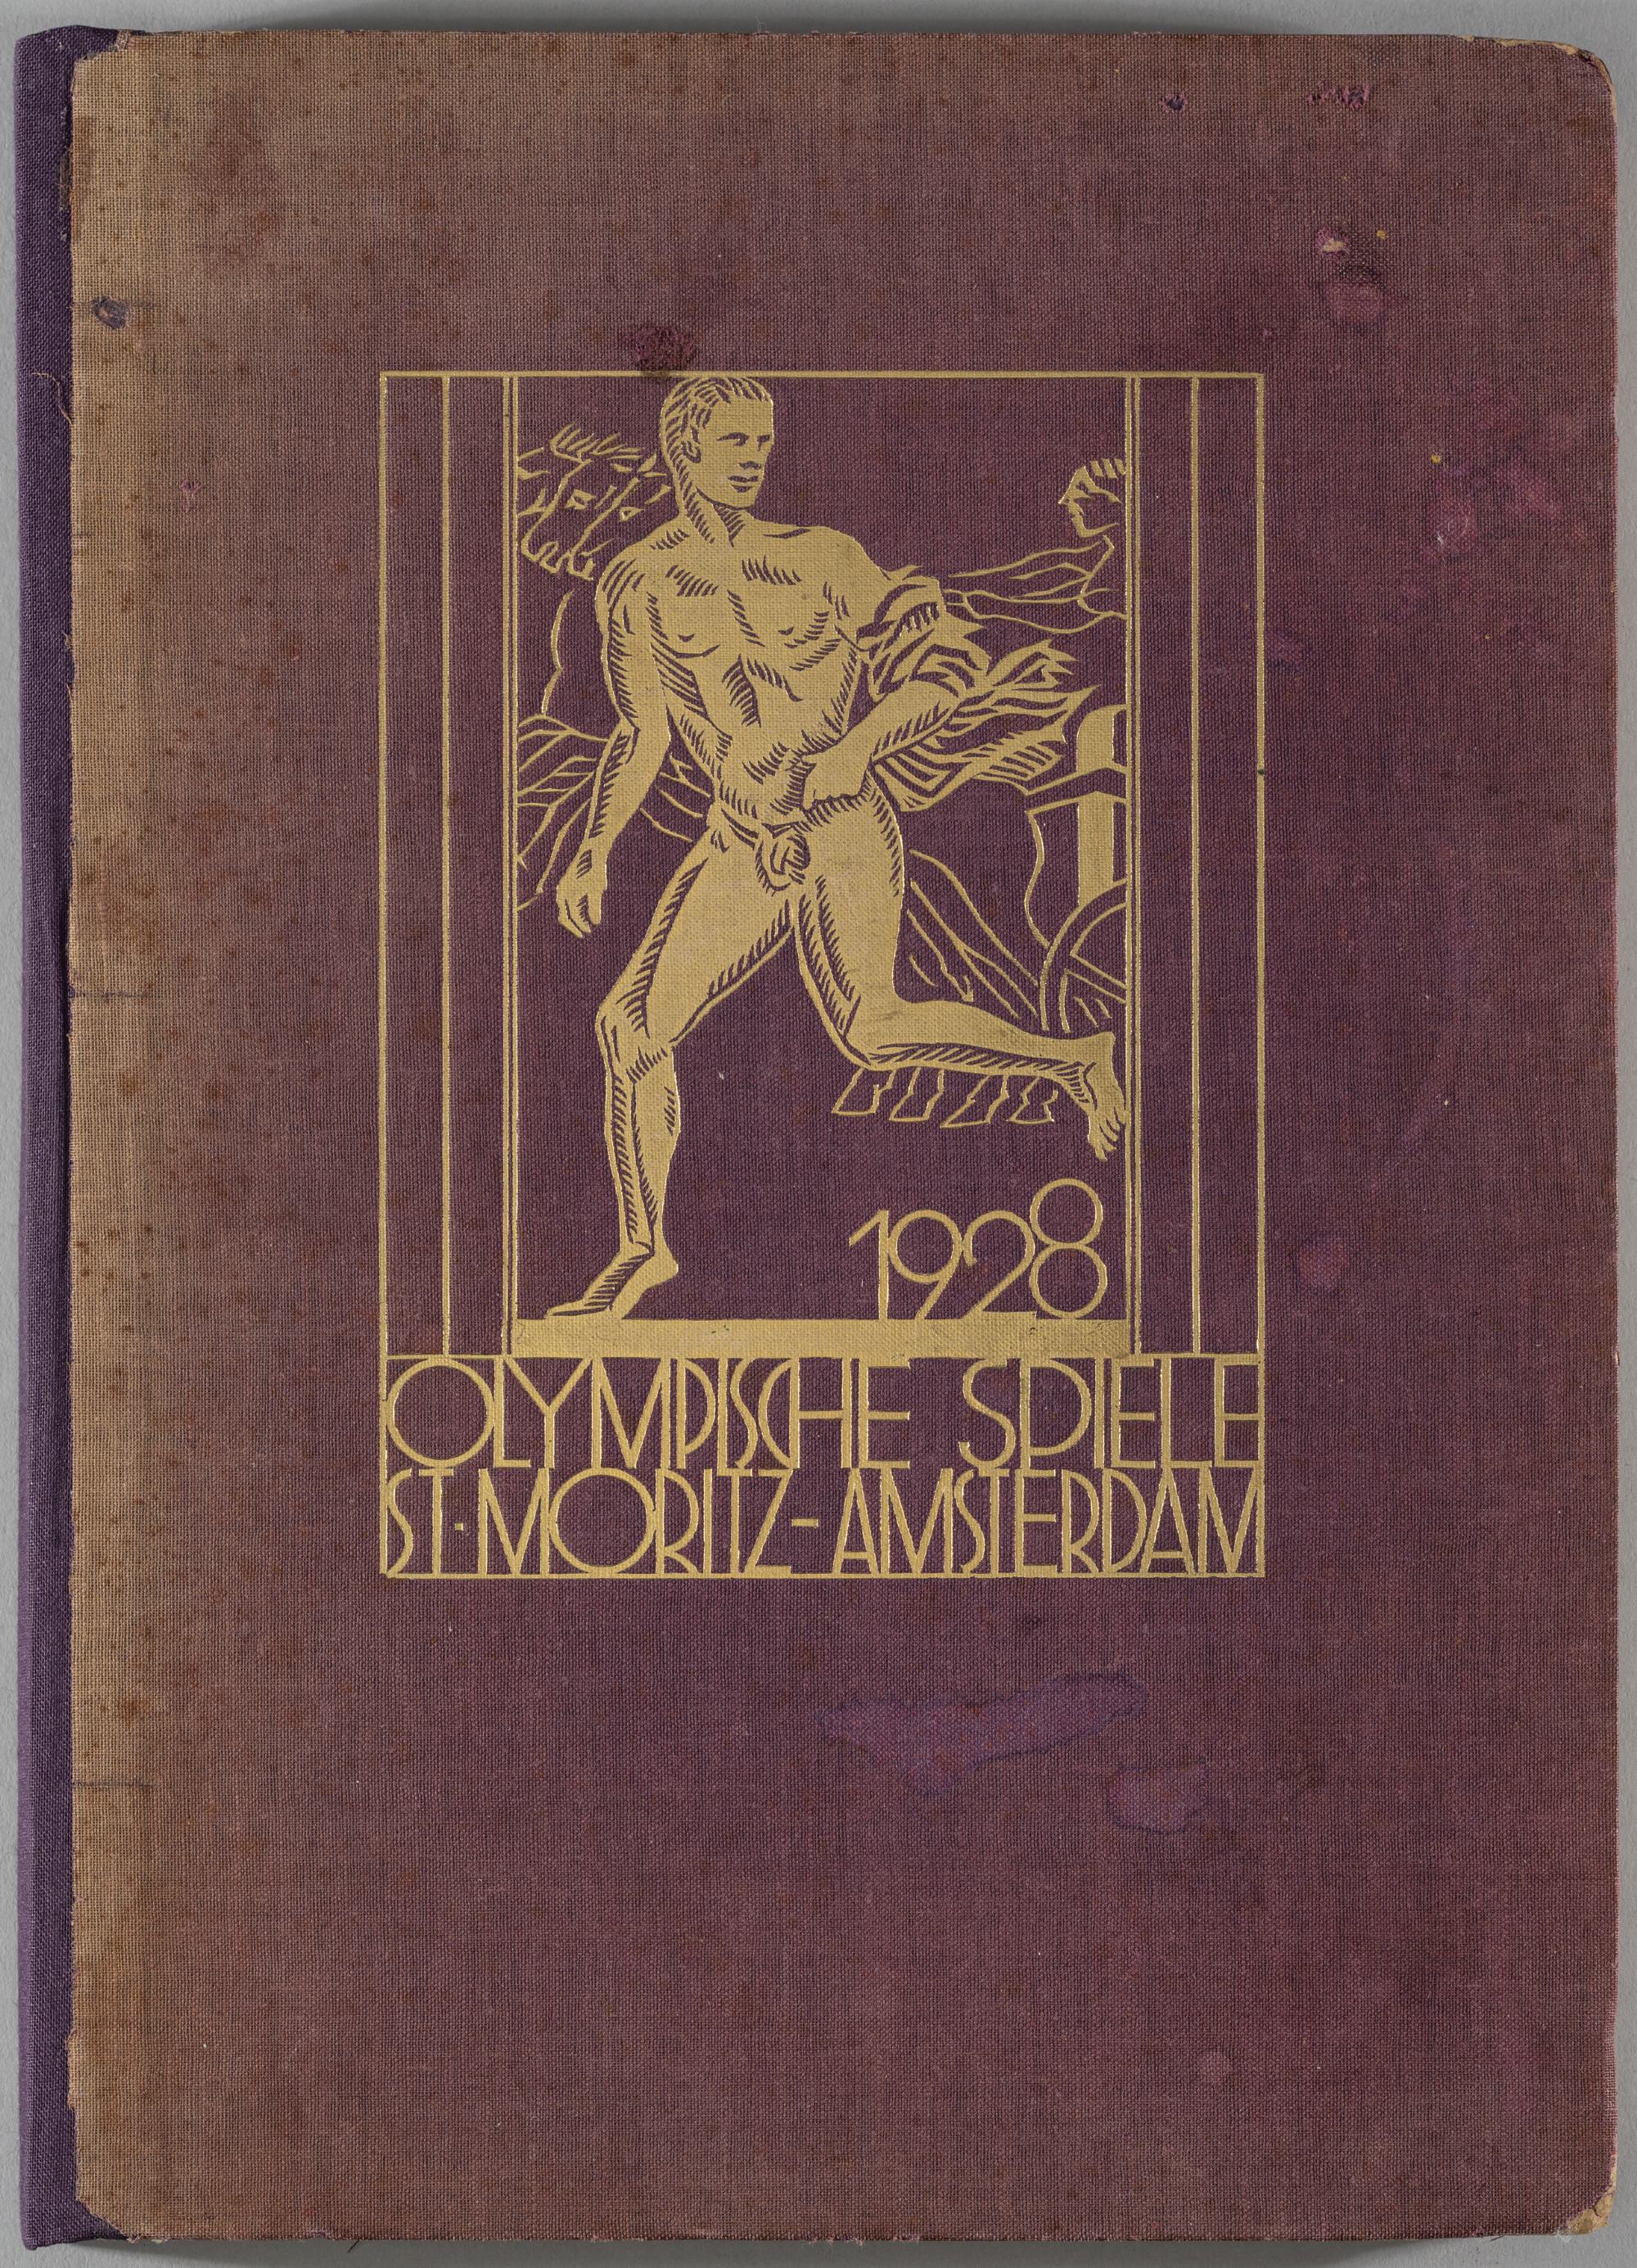 St Moritz and Amsterdam 1928 Winter and Summer Olympic Games "Die Olympischen Spiele hand signed